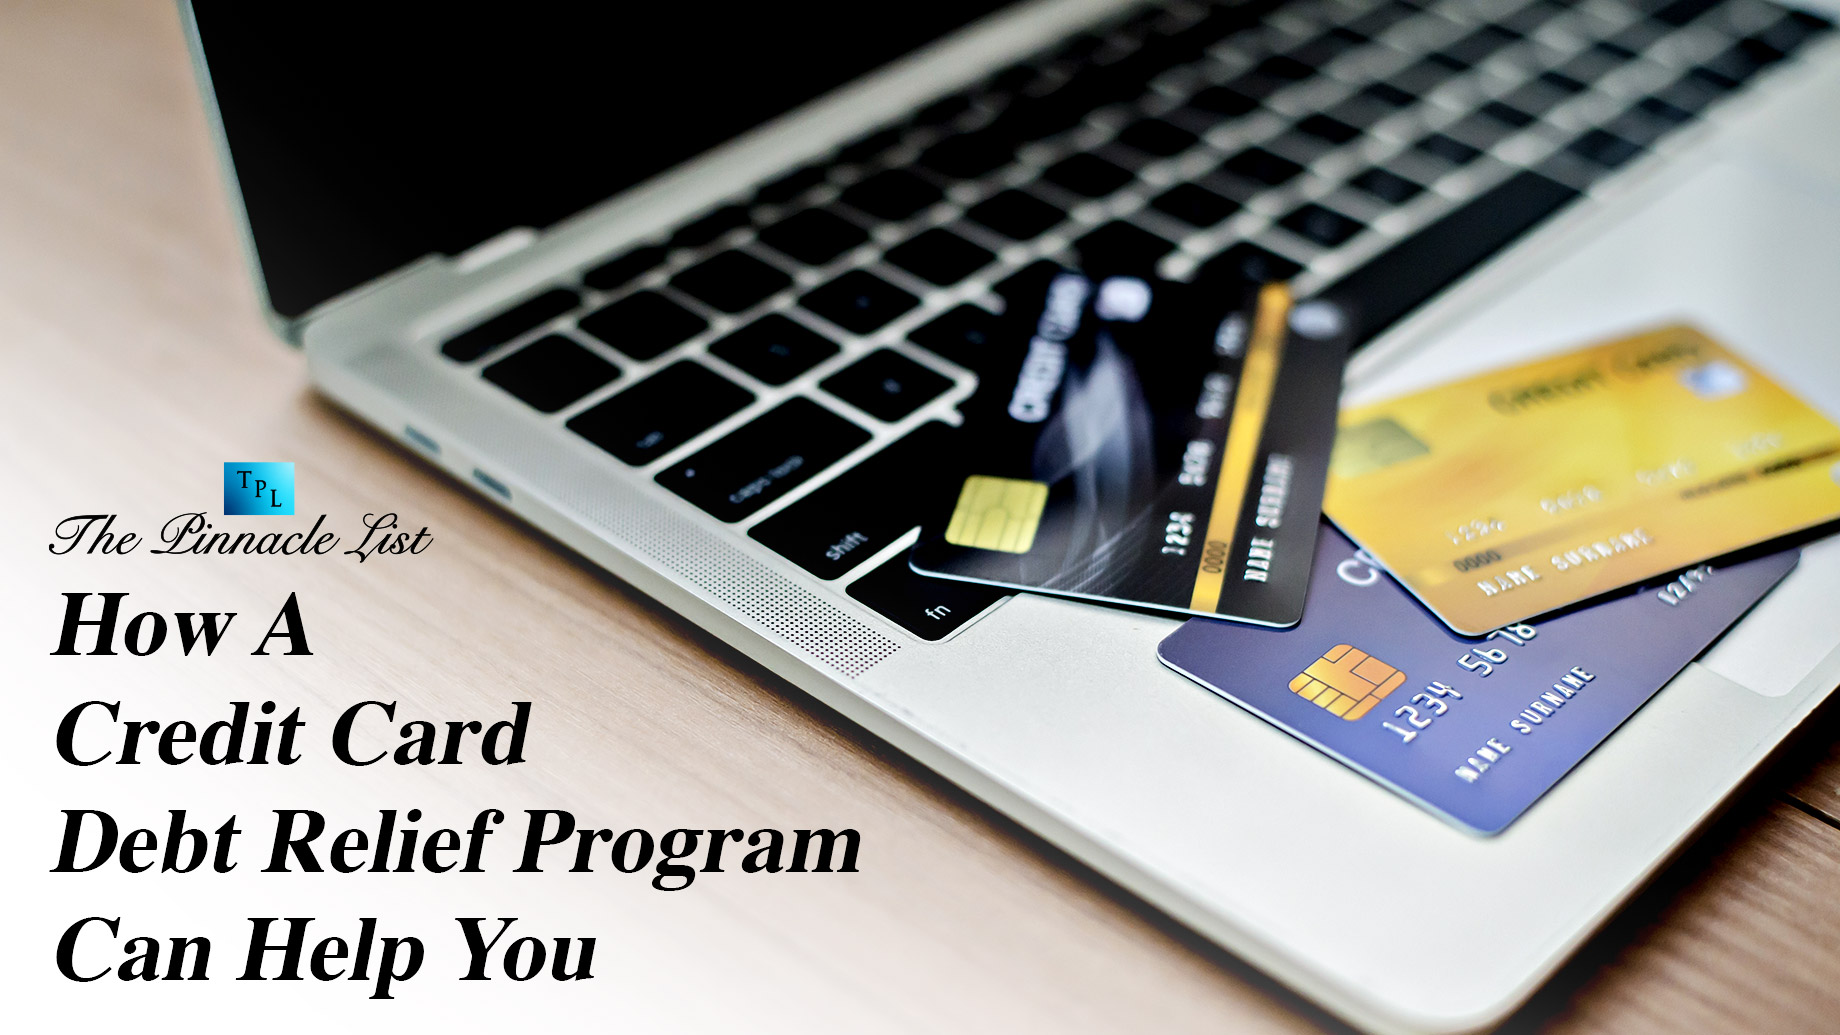 How A Credit Card Debt Relief Program Can Help You